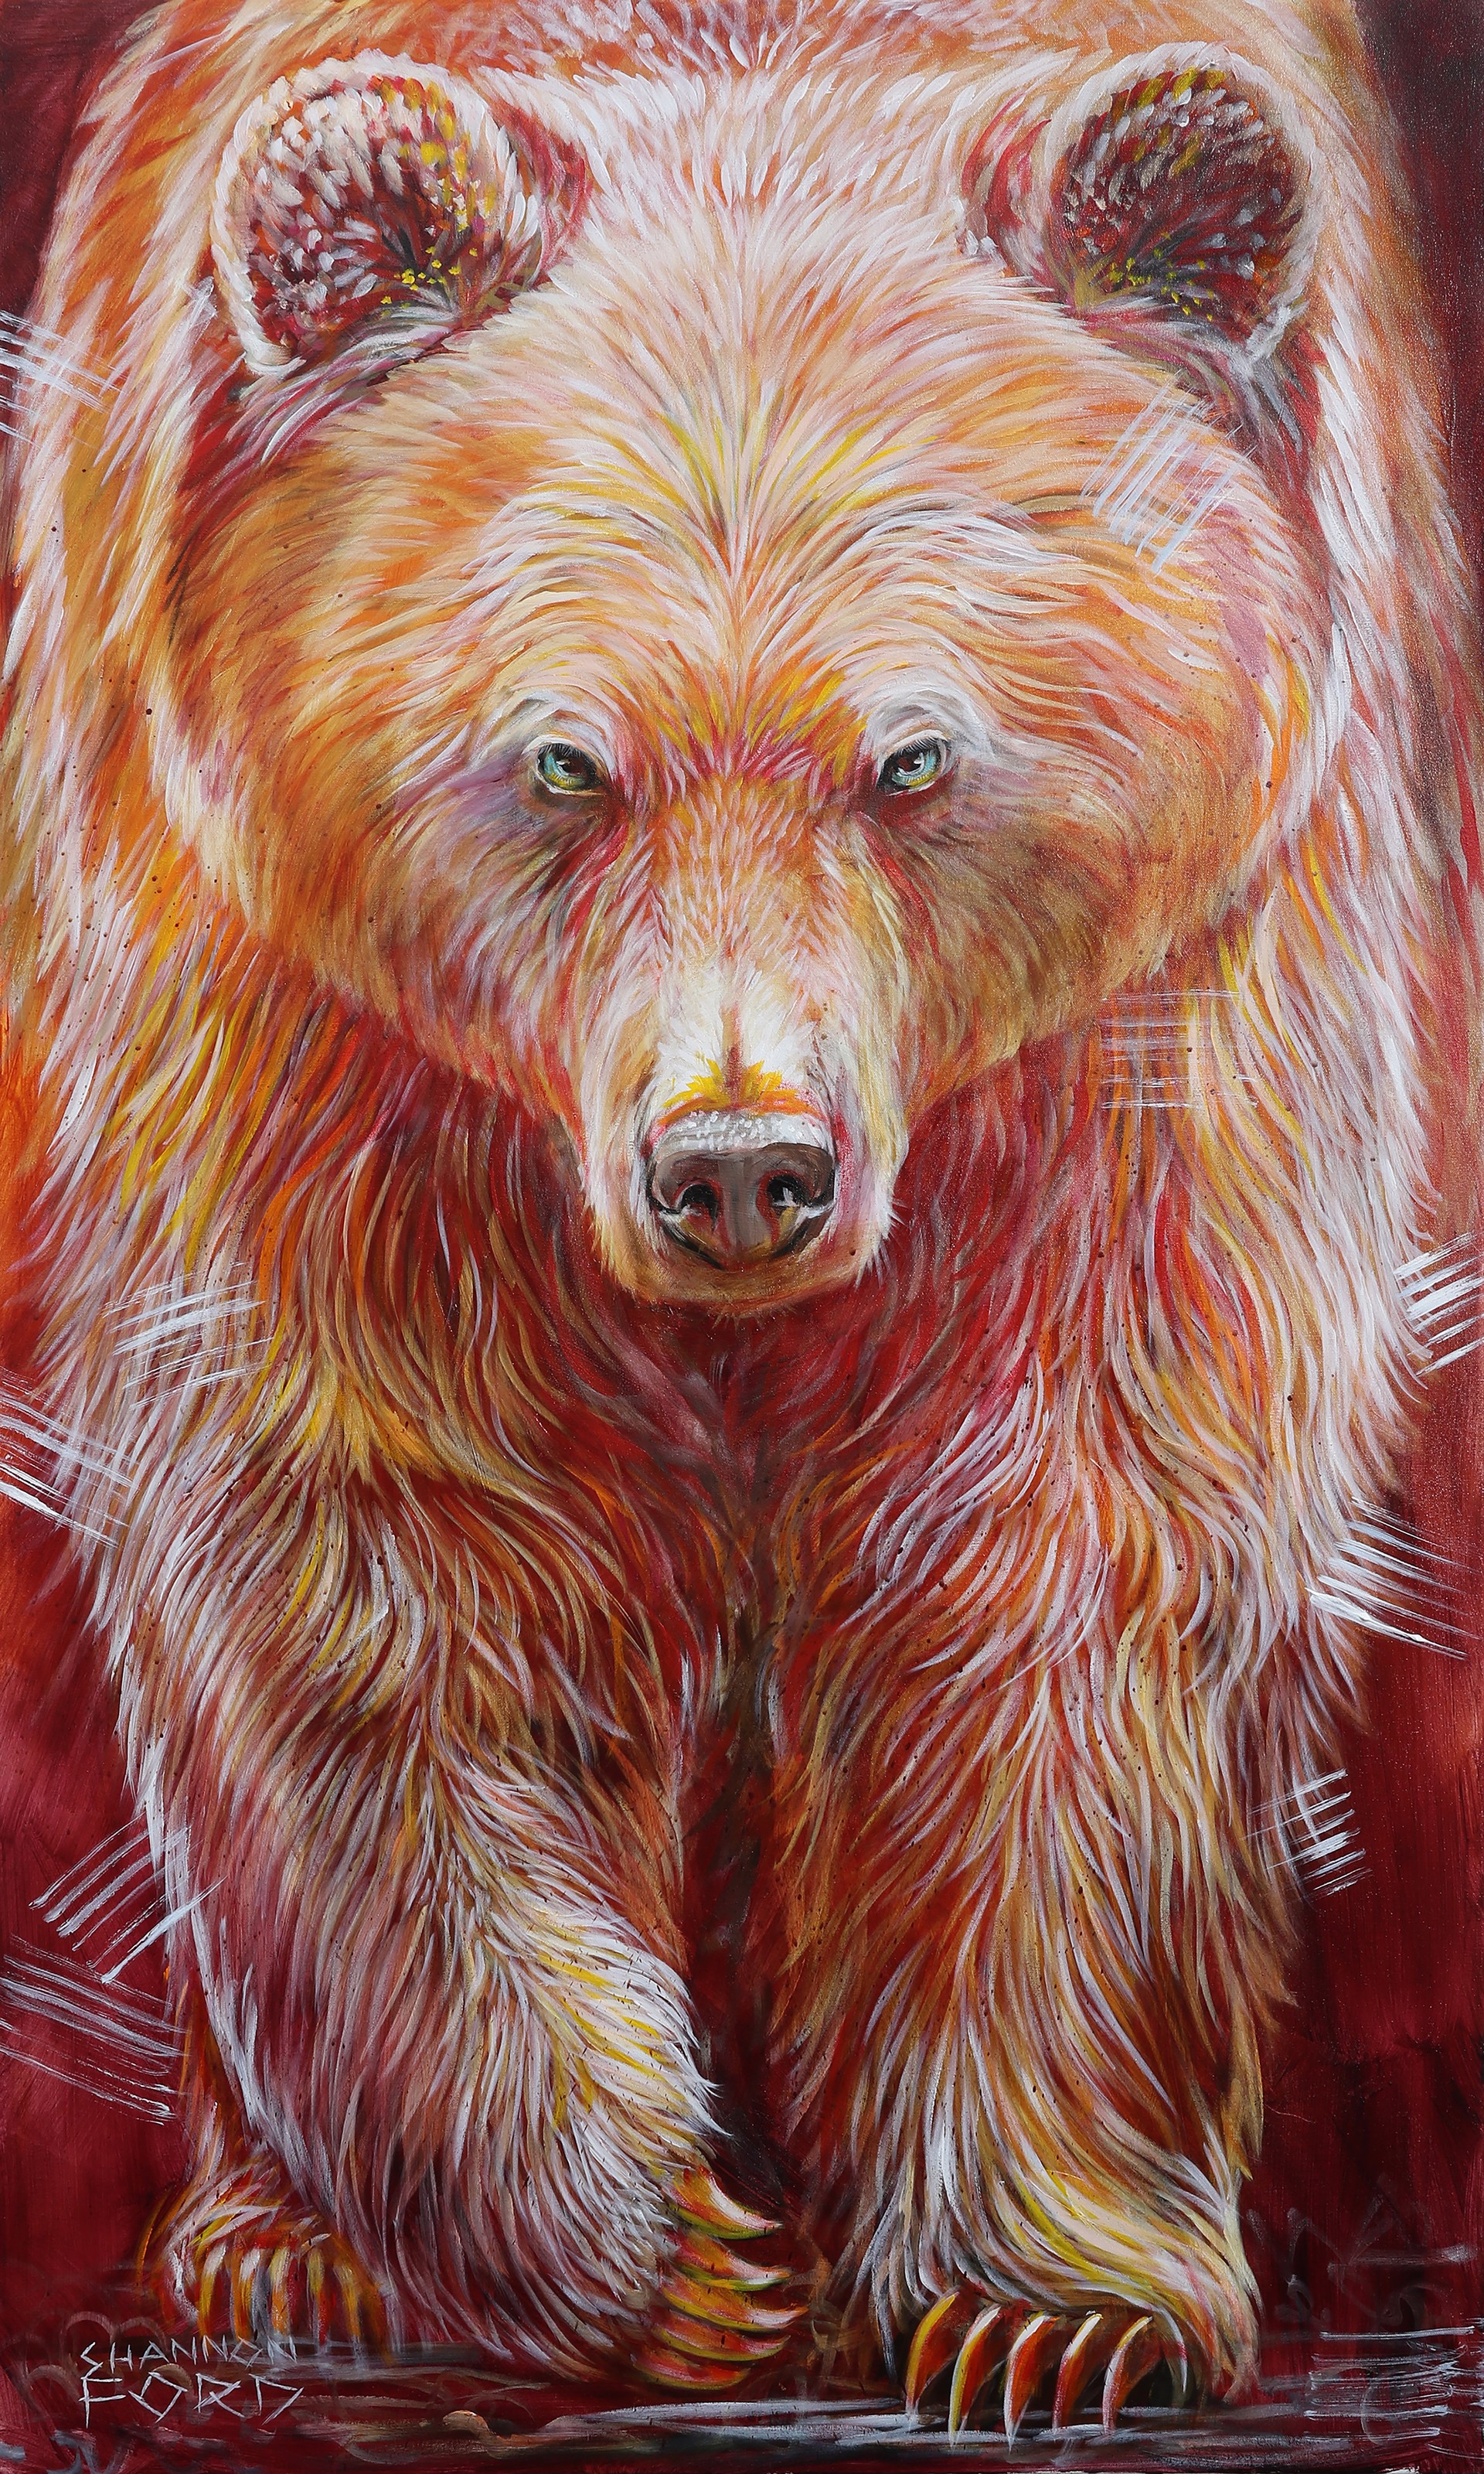 That Bear by Shannon Ford